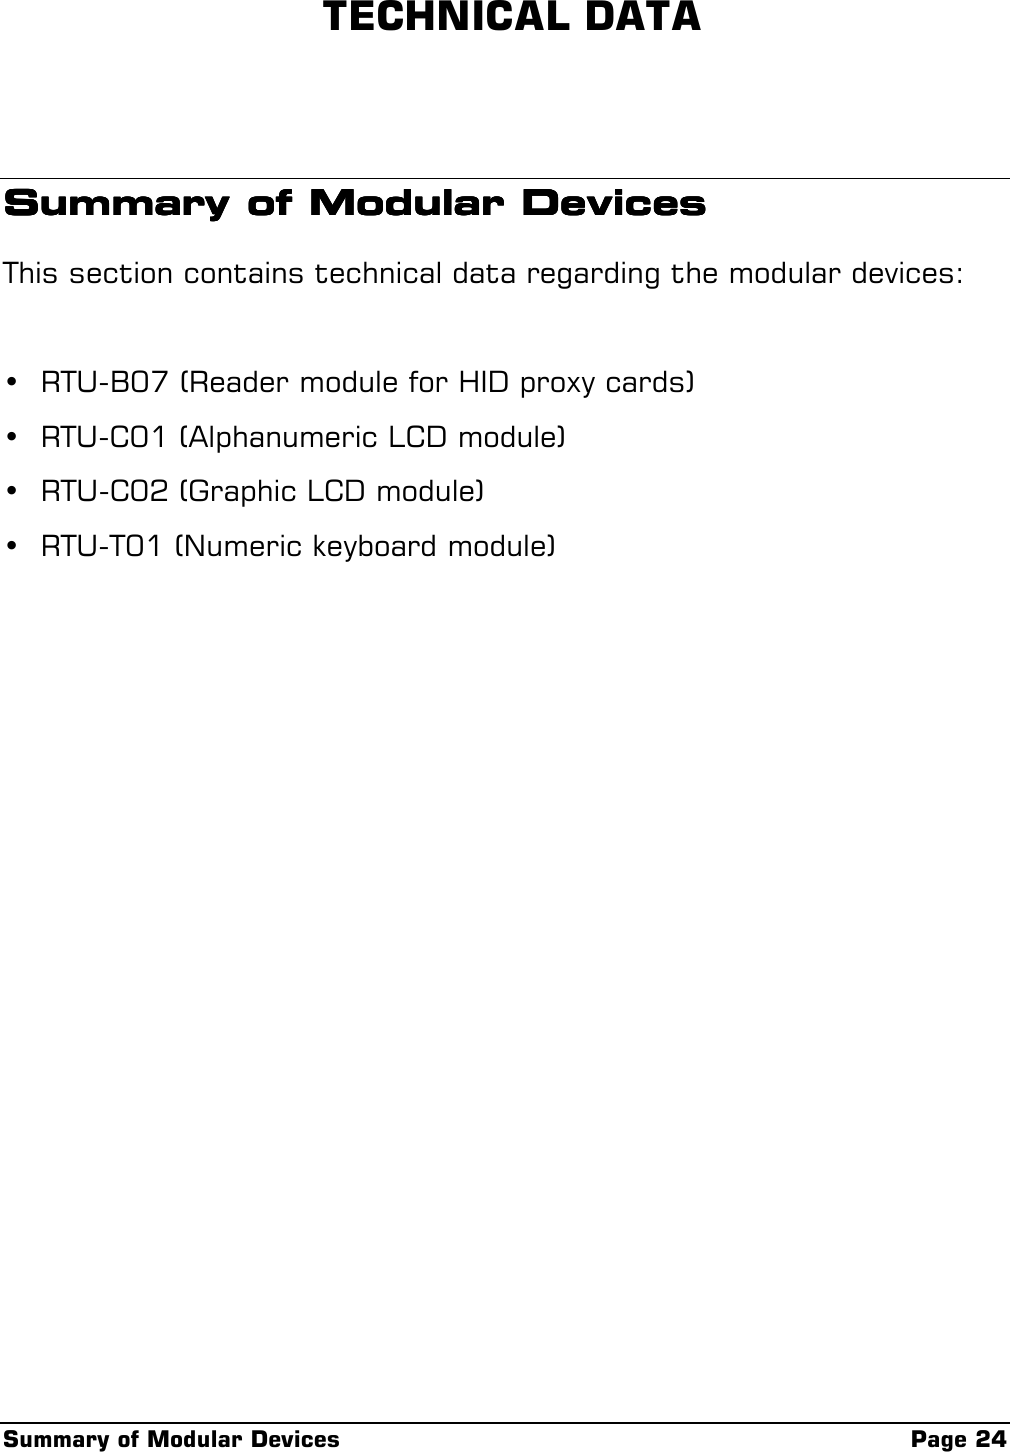 Summary of Modular Devices Page 24 TECHNICAL DATASummary of Modular DevicesSummary of Modular DevicesSummary of Modular DevicesSummary of Modular DevicesThis section contains technical data regarding the modular devices:• RTU-B07 (Reader module for HID proxy cards)• RTU-C01 (Alphanumeric LCD module)• RTU-C02 (Graphic LCD module)• RTU-T01 (Numeric keyboard module)